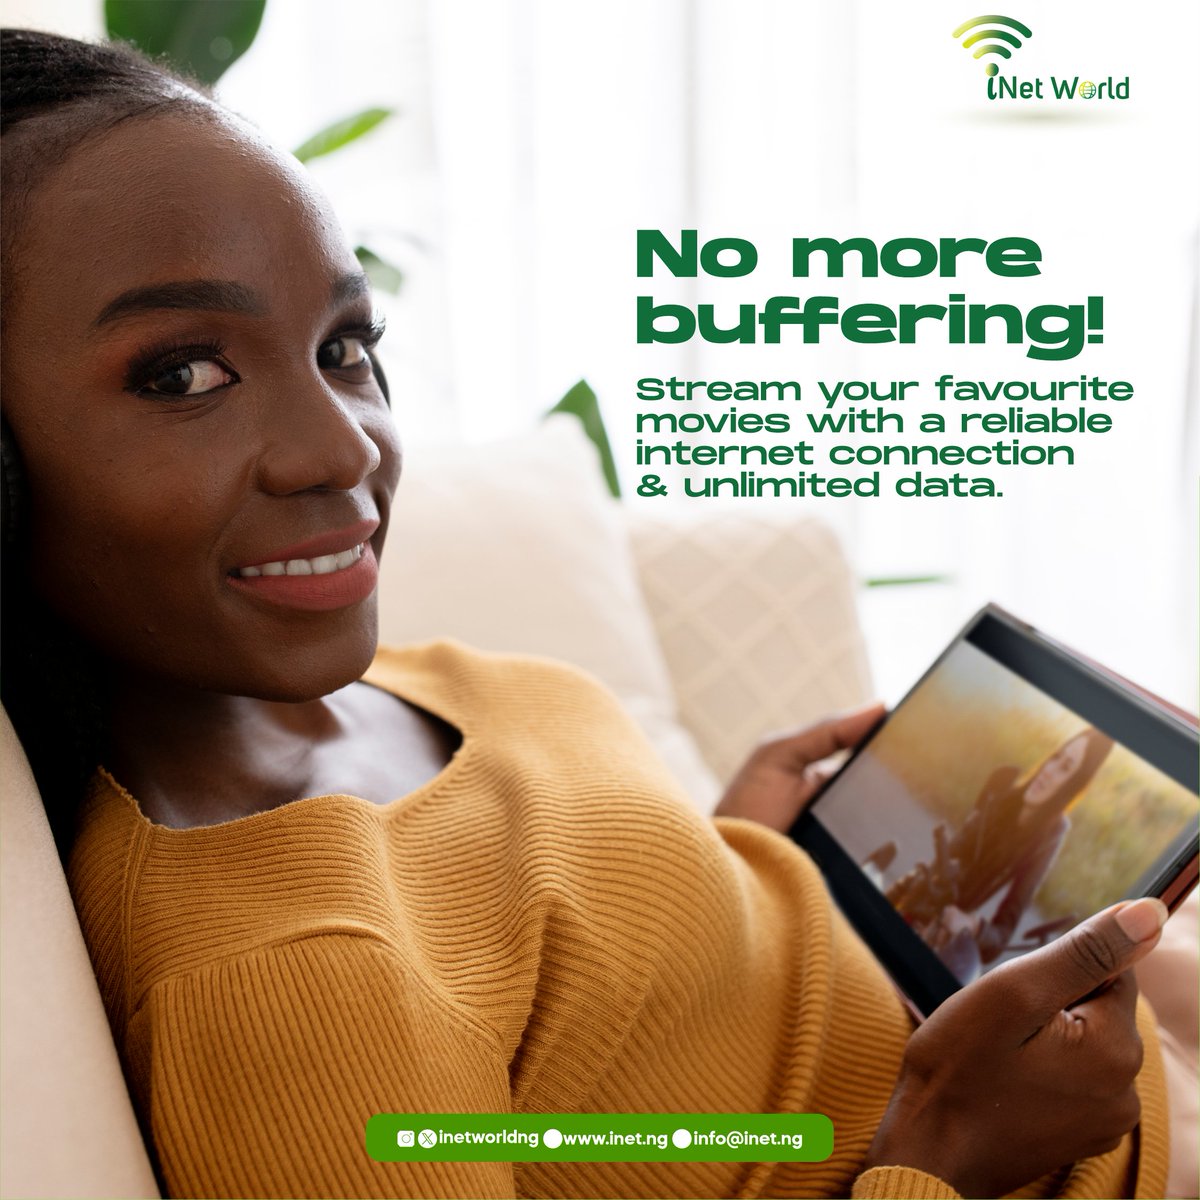 No more slow loading or frustrating interruptions.  🚫🐢

Enjoy uninterrupted streaming of your favorite movies and shows with a reliable internet connection and unlimited data. 📶🍿

#Onana Twe Twe Wizkid Harmattan Arteta CODM Agba Baller Benzema #lifeissweetwithvuvaa